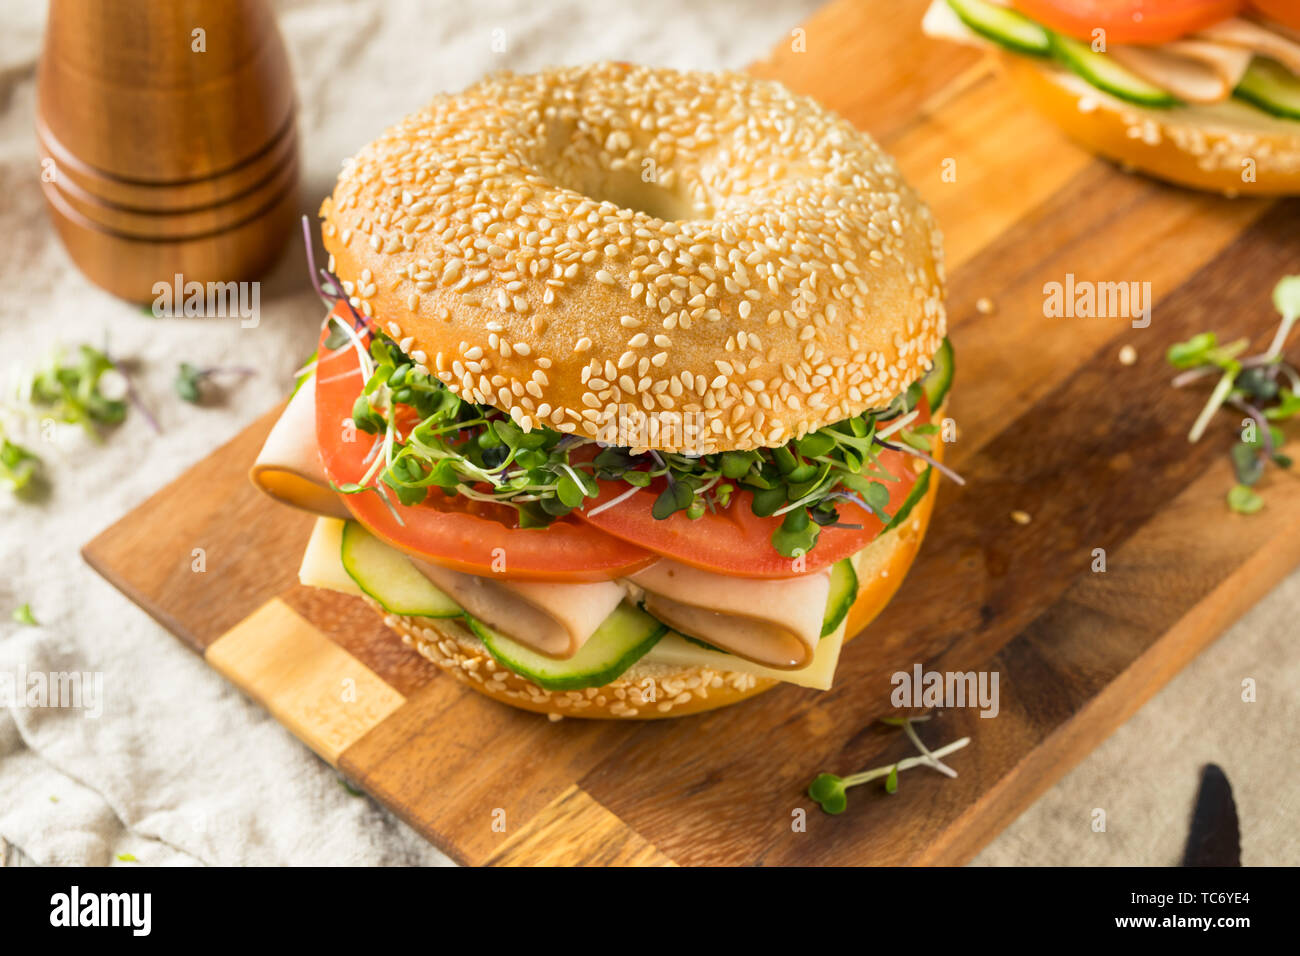 Homemade Bagel Turkey Sandwich with Tomato and Cucumber Stock Photo